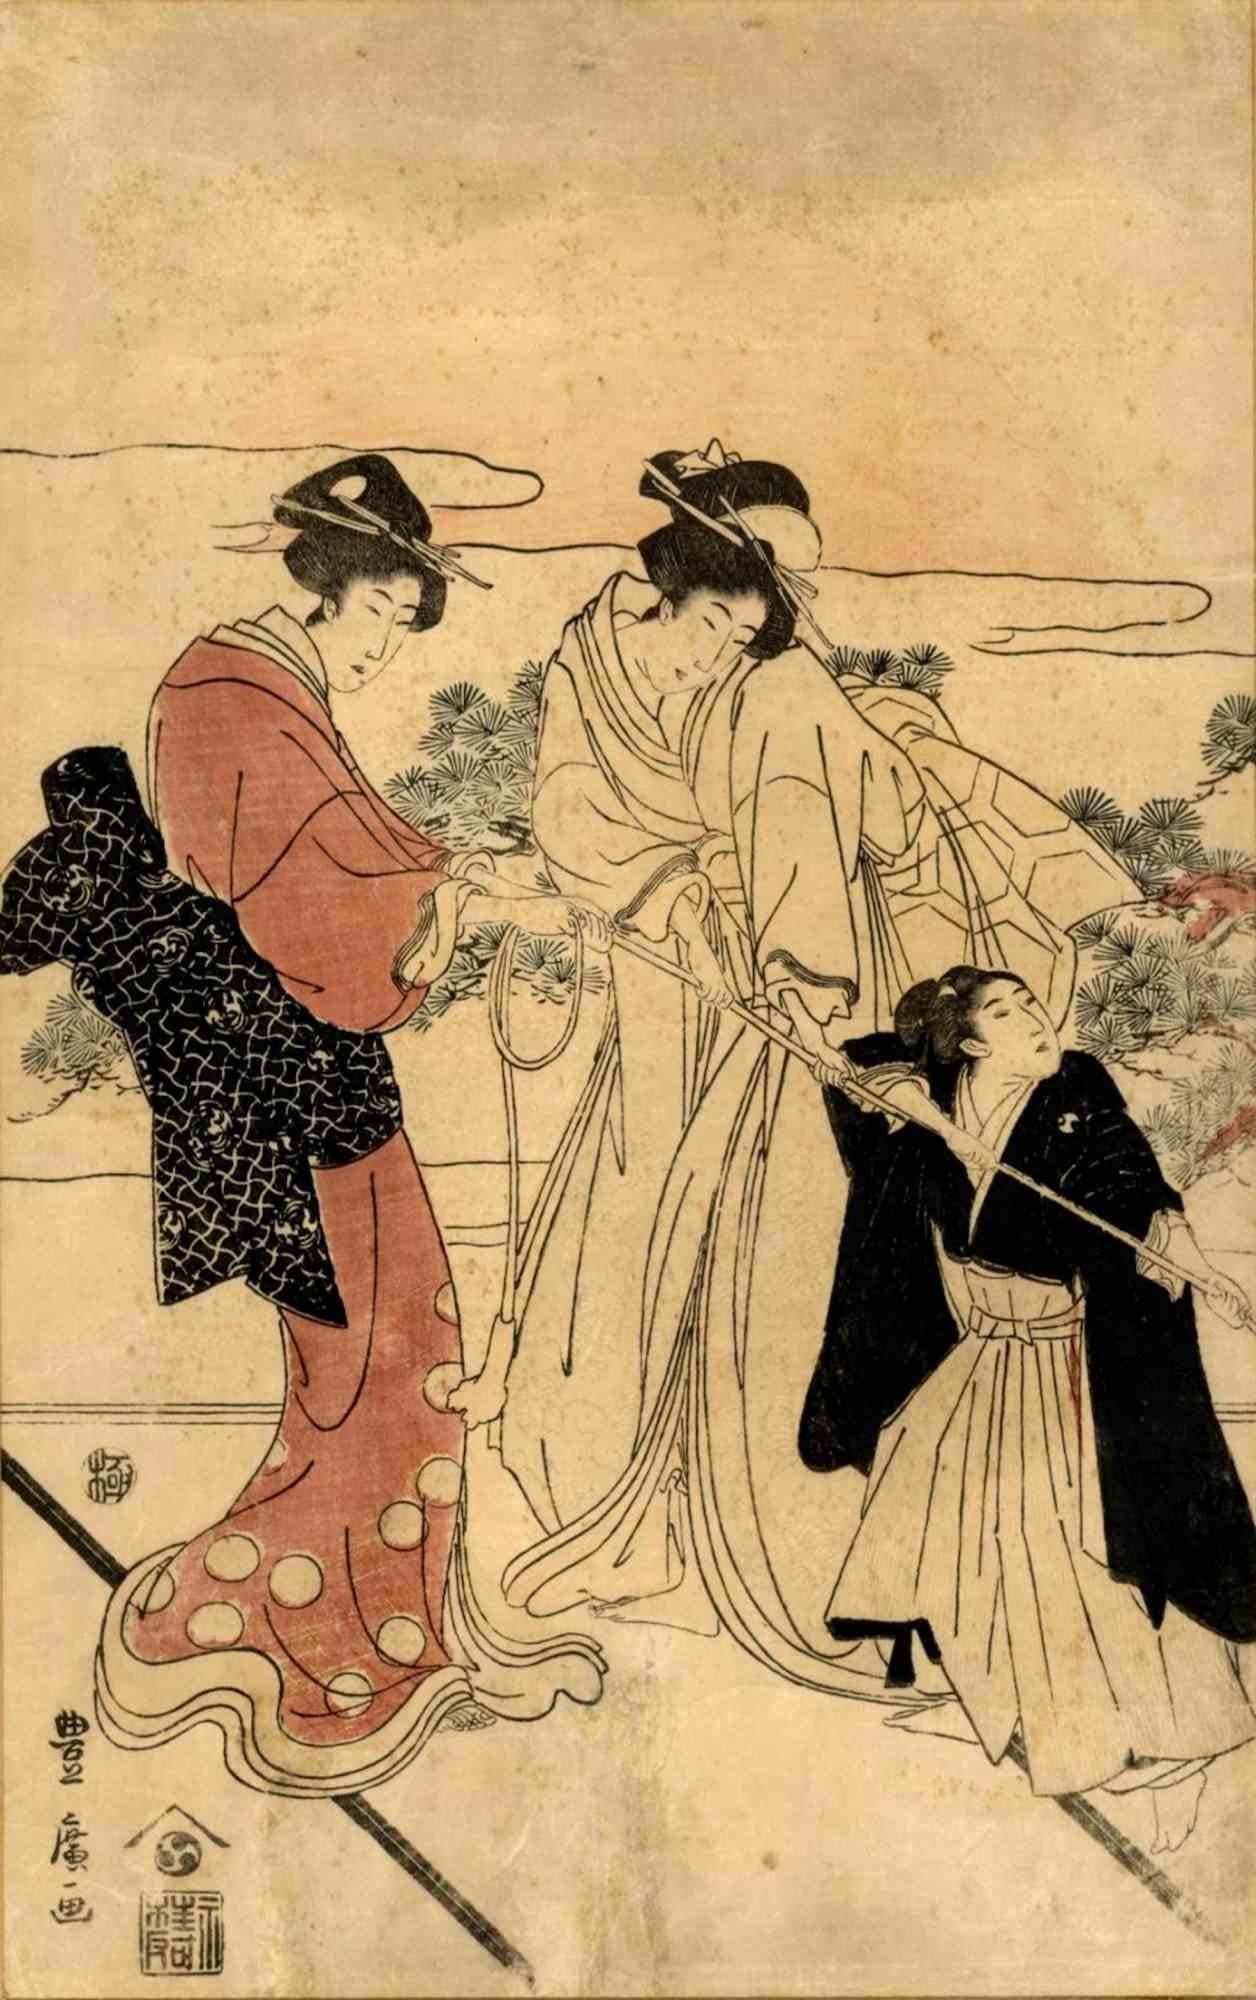  Bijinga (New year festivities) is an original modern artwork realized by Utagawa Toyohiro in the Early 19th Century.

Woodcut Print Oban Format

New year festivities, two elegant ladies and a child pulling a flower car.

Signed: Toyohiro ga.